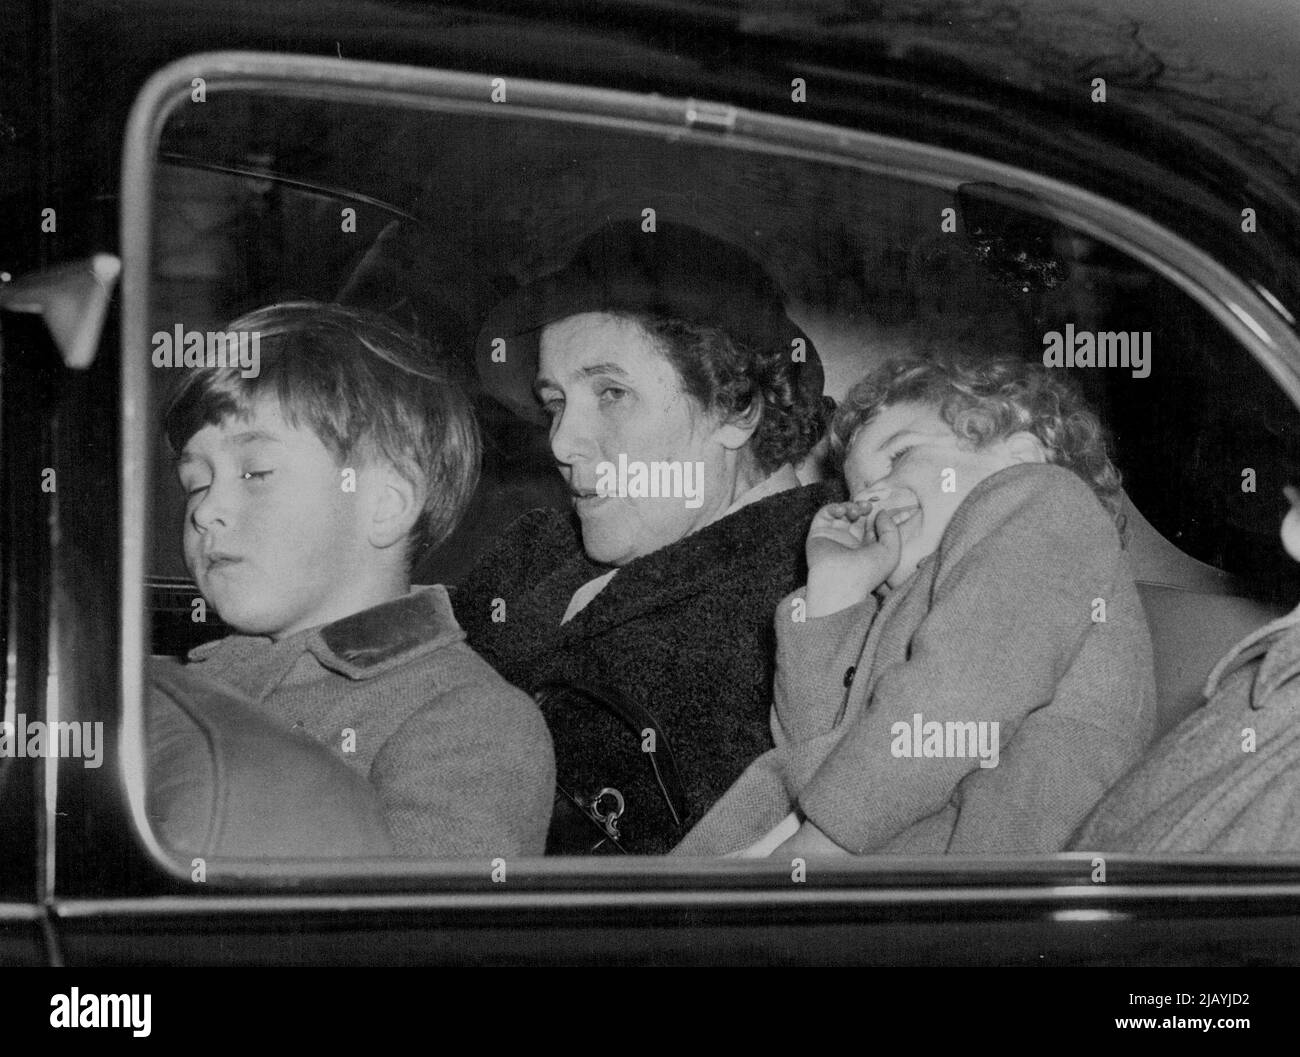 Royal Children Return To Clarence House -- Prince Charles and Princess Anne Photographed as they returned to Clarence House this morning, after, their morning drive. February 12, 1954. (Photo by Topical Press Agency Ltd.). Stock Photo